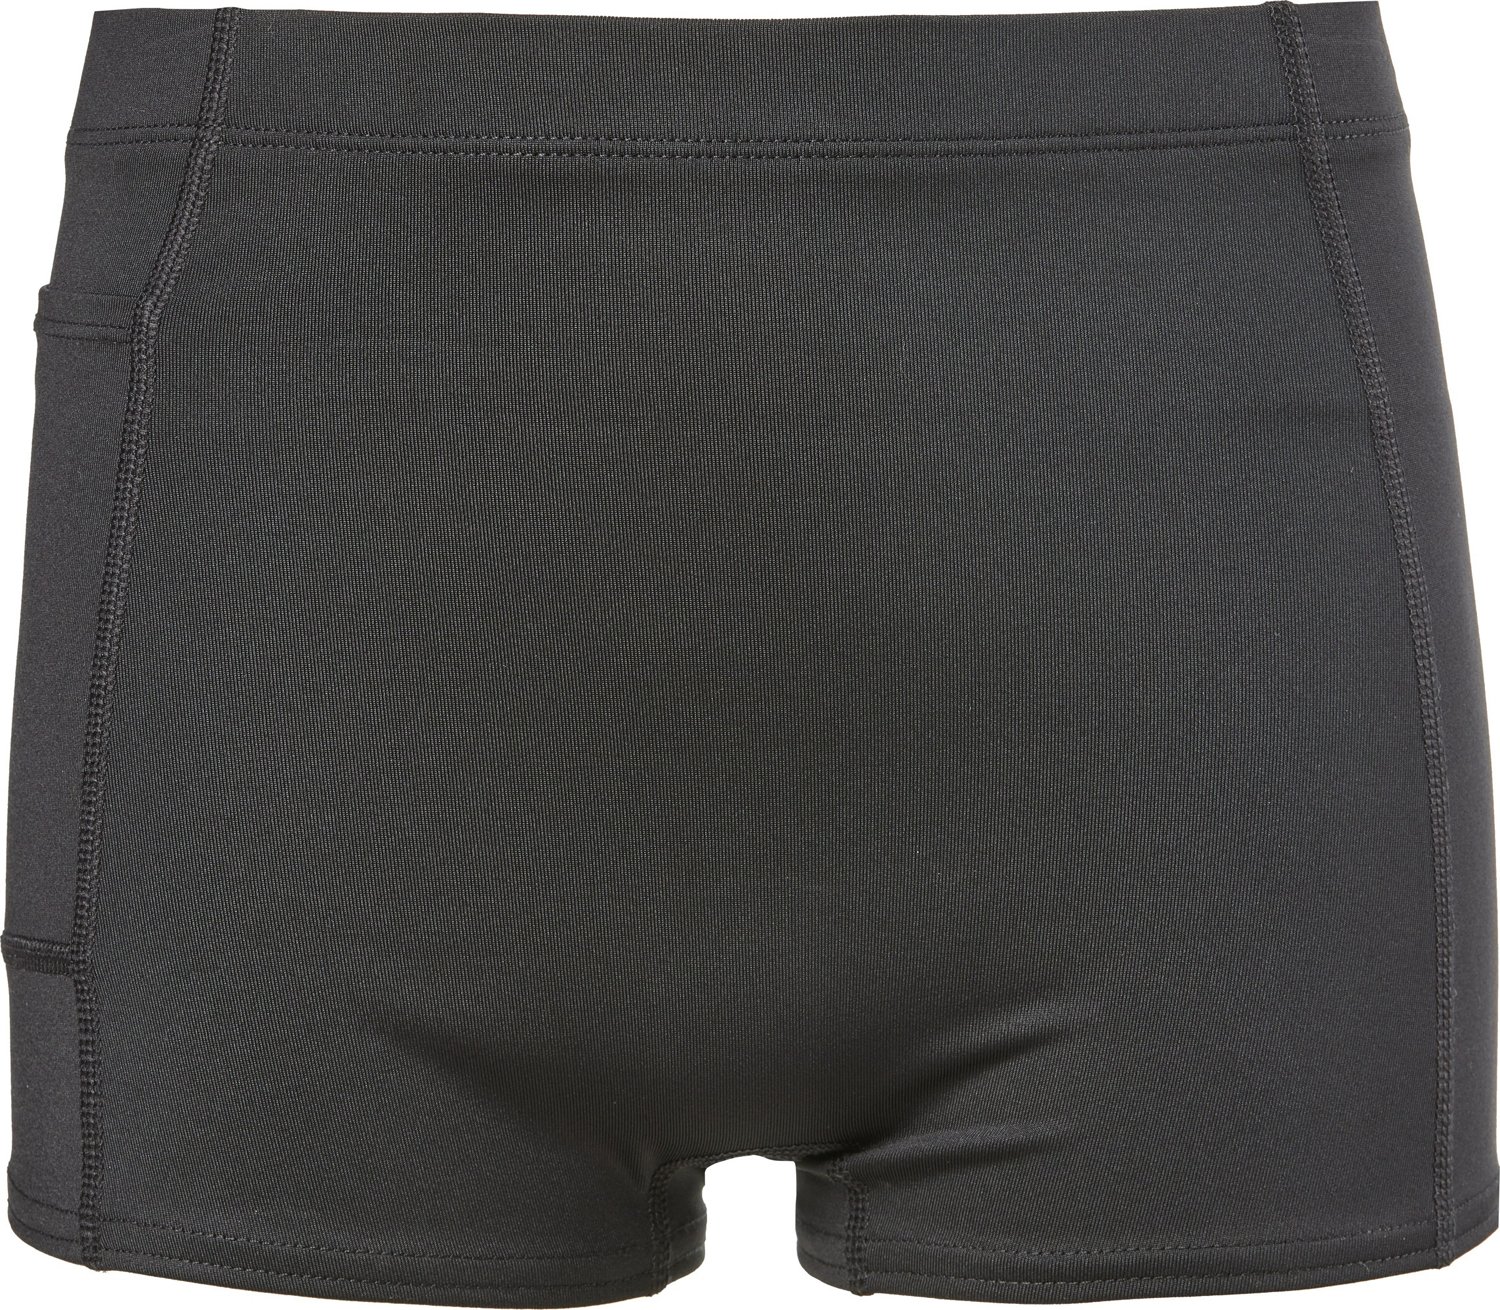 BCG Girls' Volley Training Shorts 4 in                                                                                           - view number 1 selected